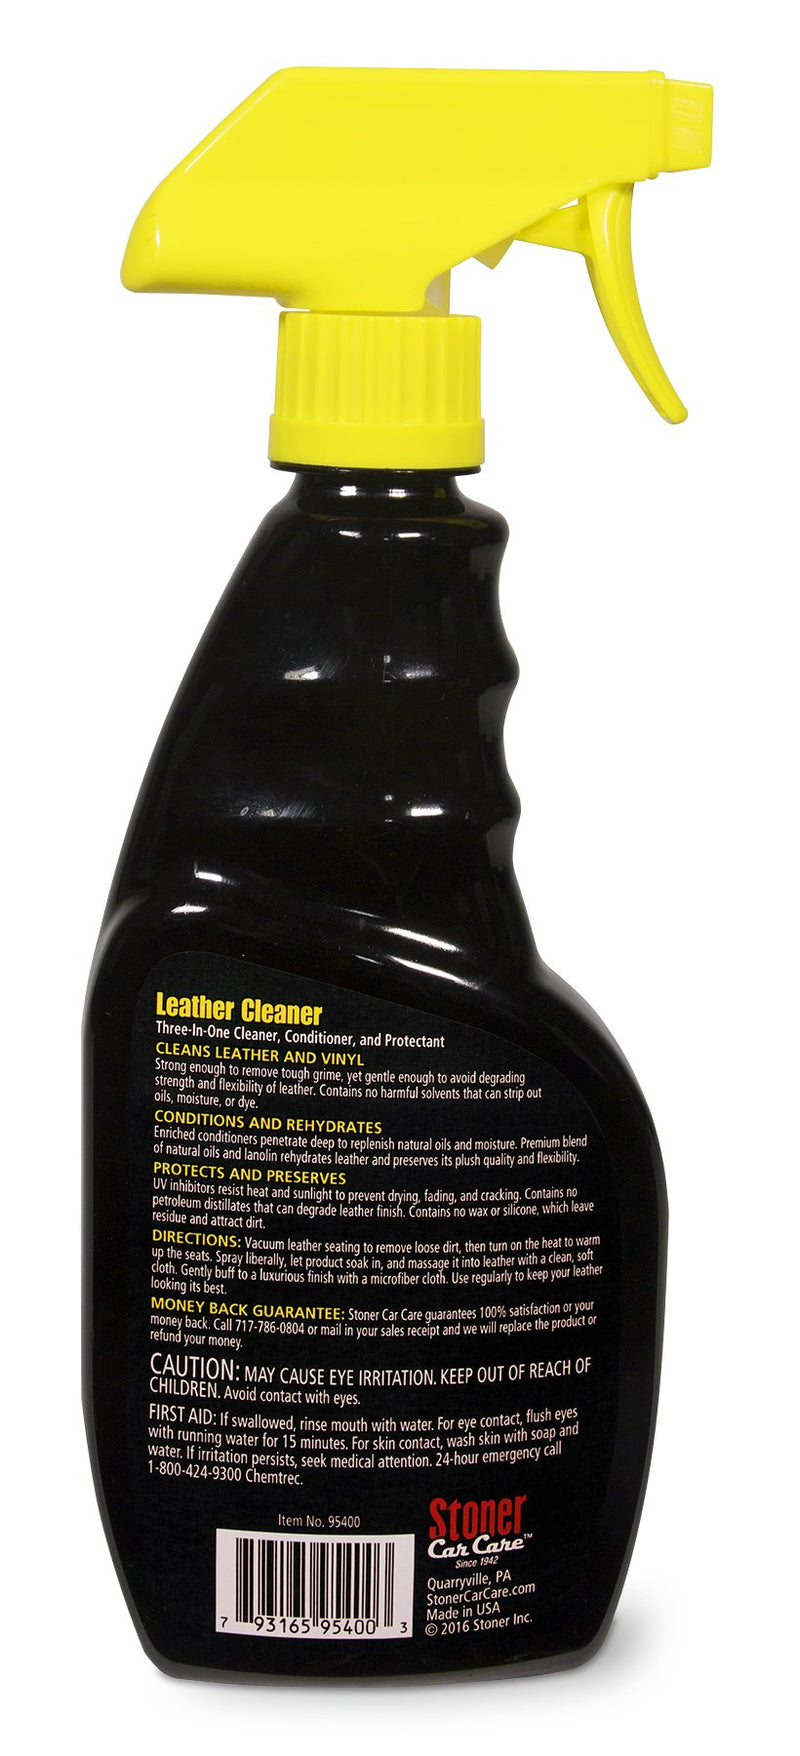  [AUSTRALIA] - Stoner Car Care 95400 Leather Cleaner and Conditioner, Interior Car Care, 3-in-1 Car Leather Cleaner, Conditions and Rehydrates, 16-Fluid Ounces, Set of 1